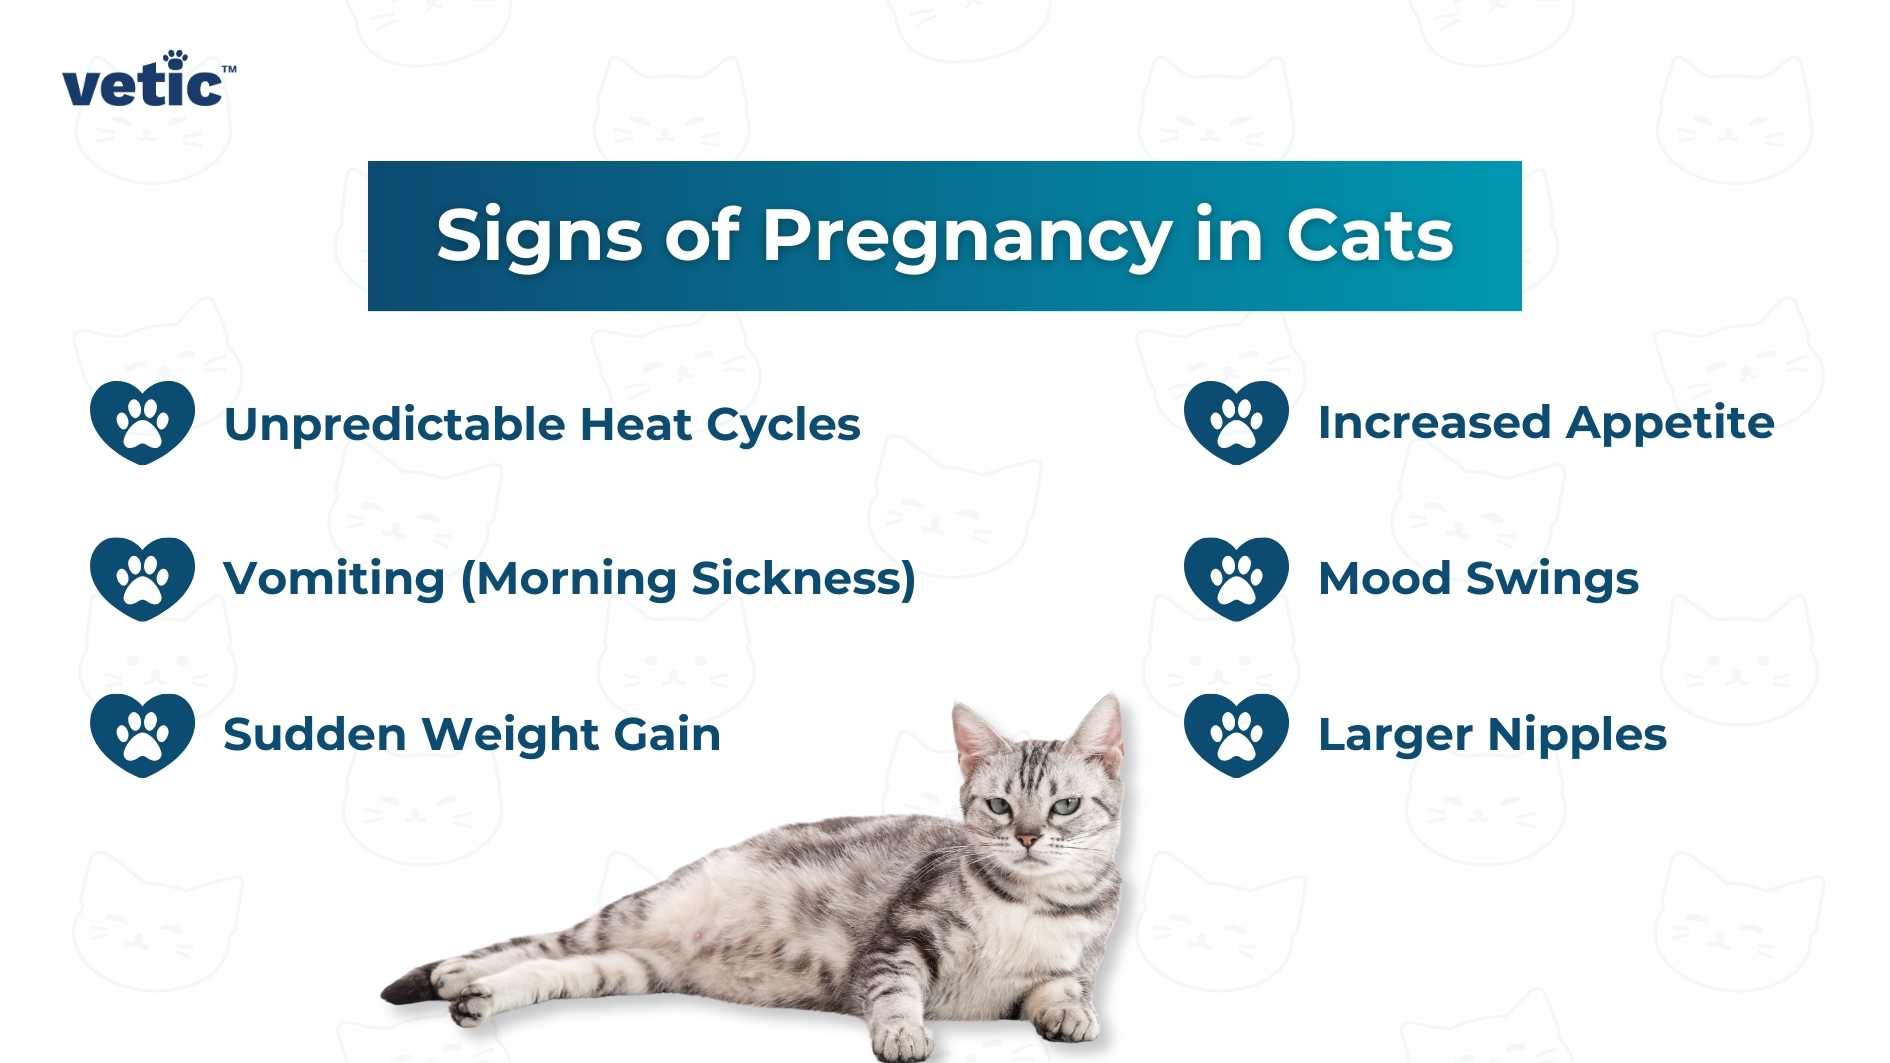 n informative image by Vetic, featuring a list of signs of pregnancy in cats, accompanied by icons and an image of a cat. Unpredictable Heat Cycles Increased Appetite Sudden Weight Gain Vomiting (Morning Sickness) Mood Swings Larger Nipples